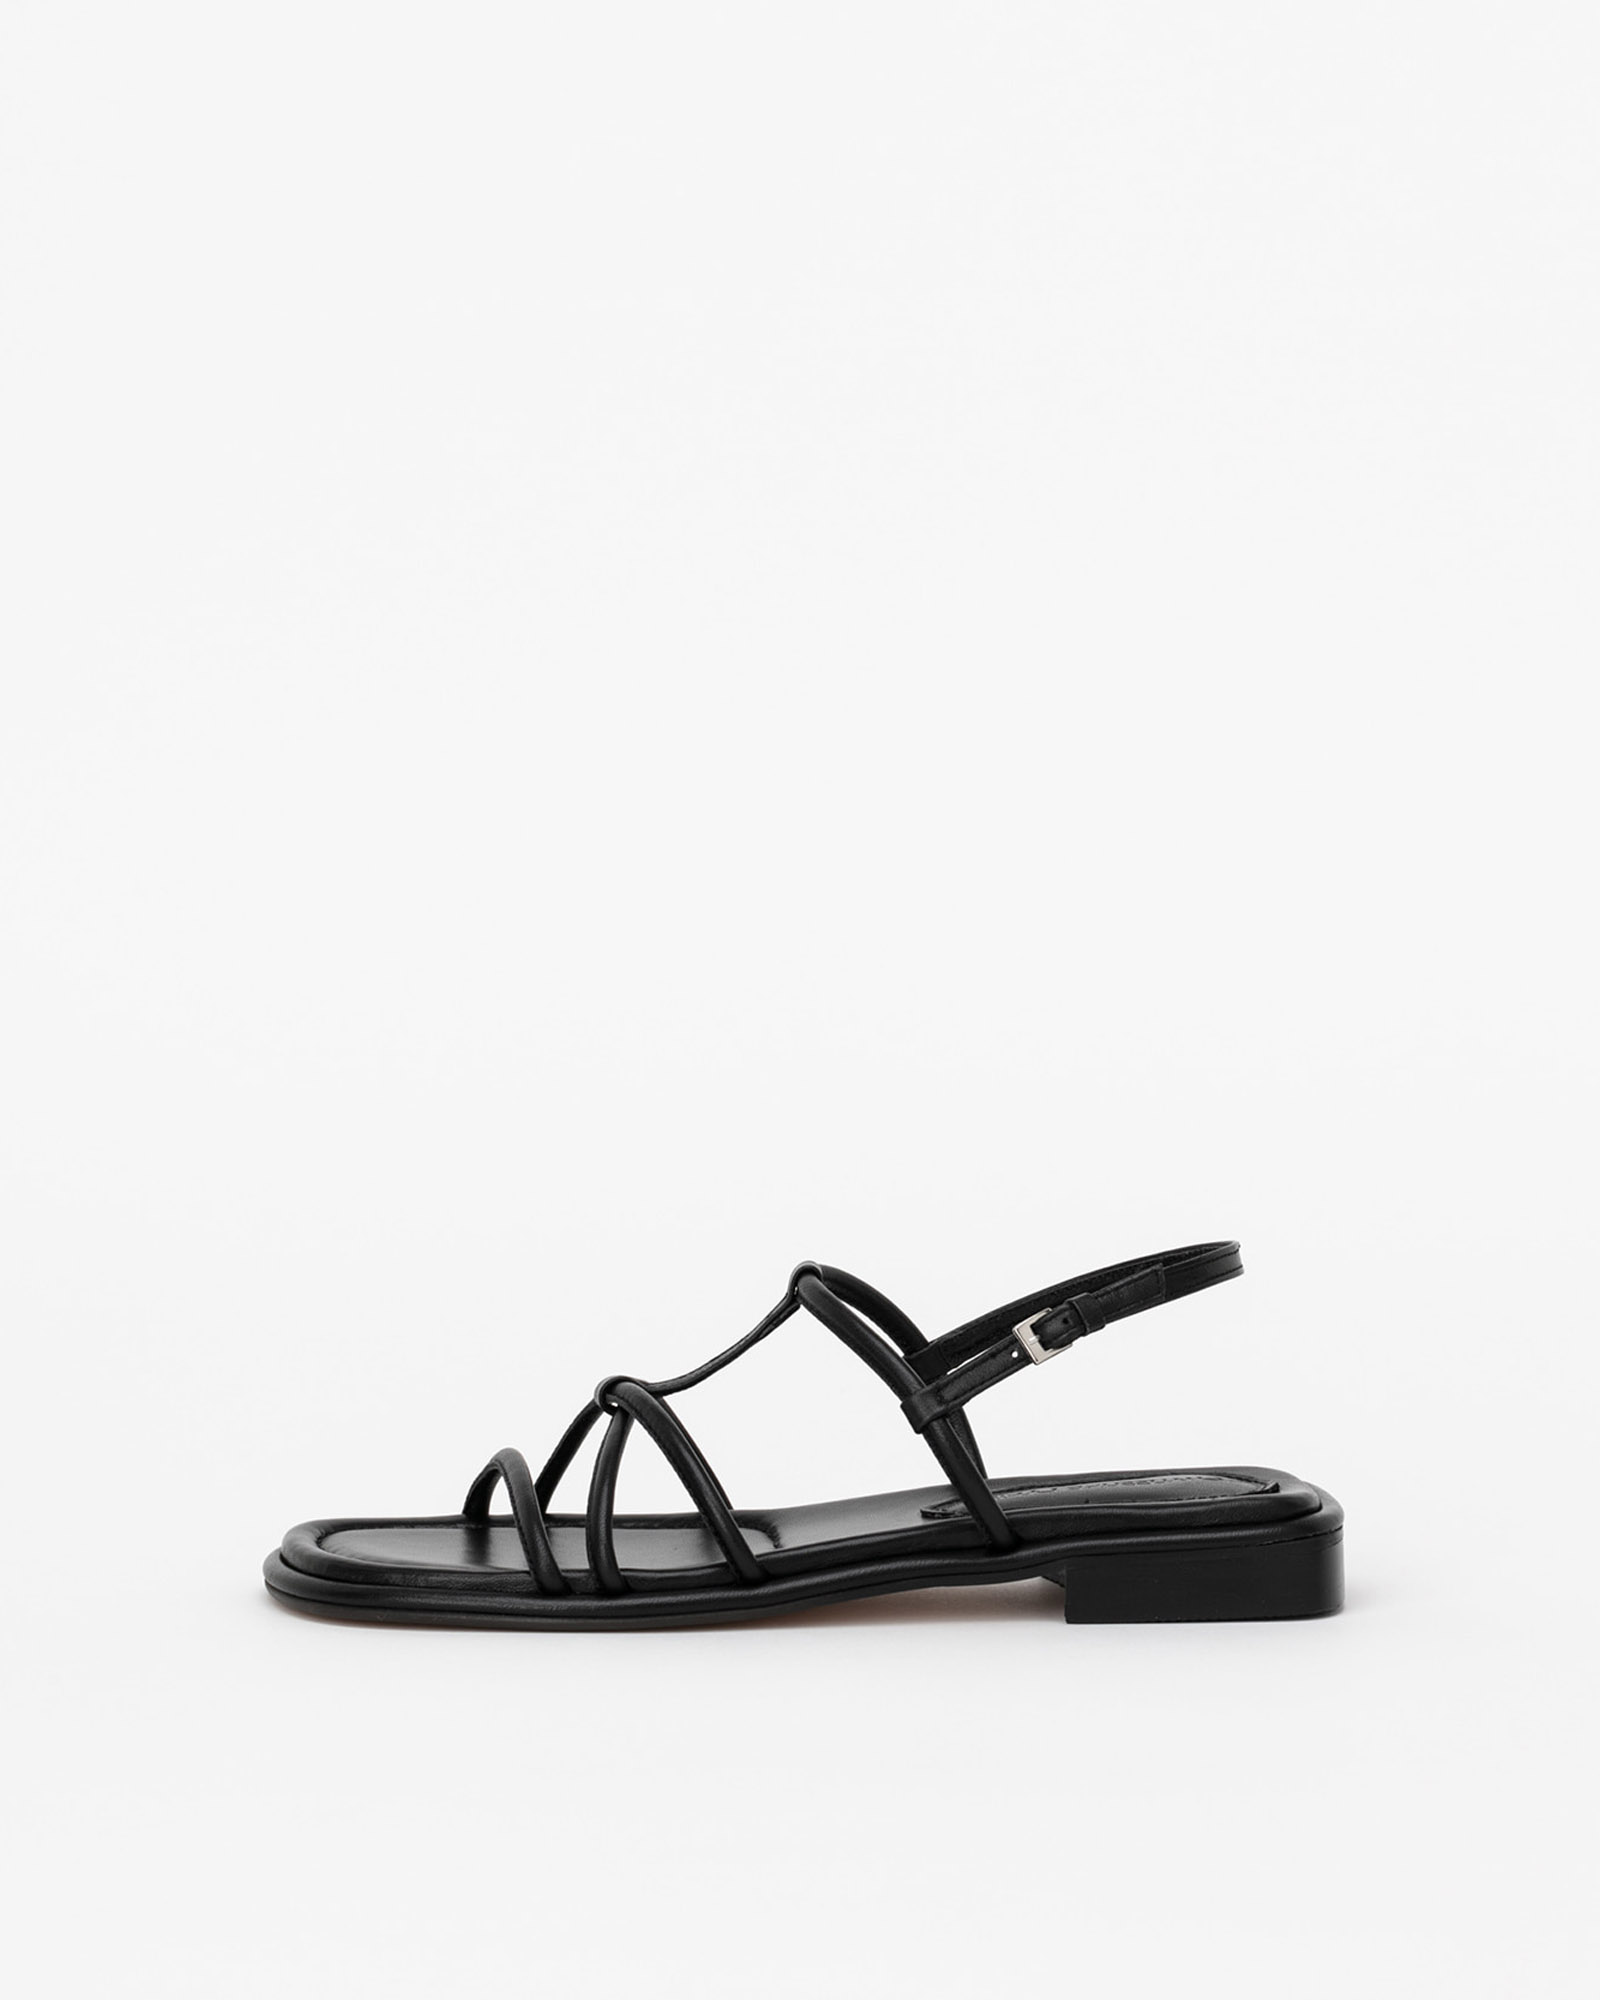 Restee Padded Strap Flat Sandals in Black